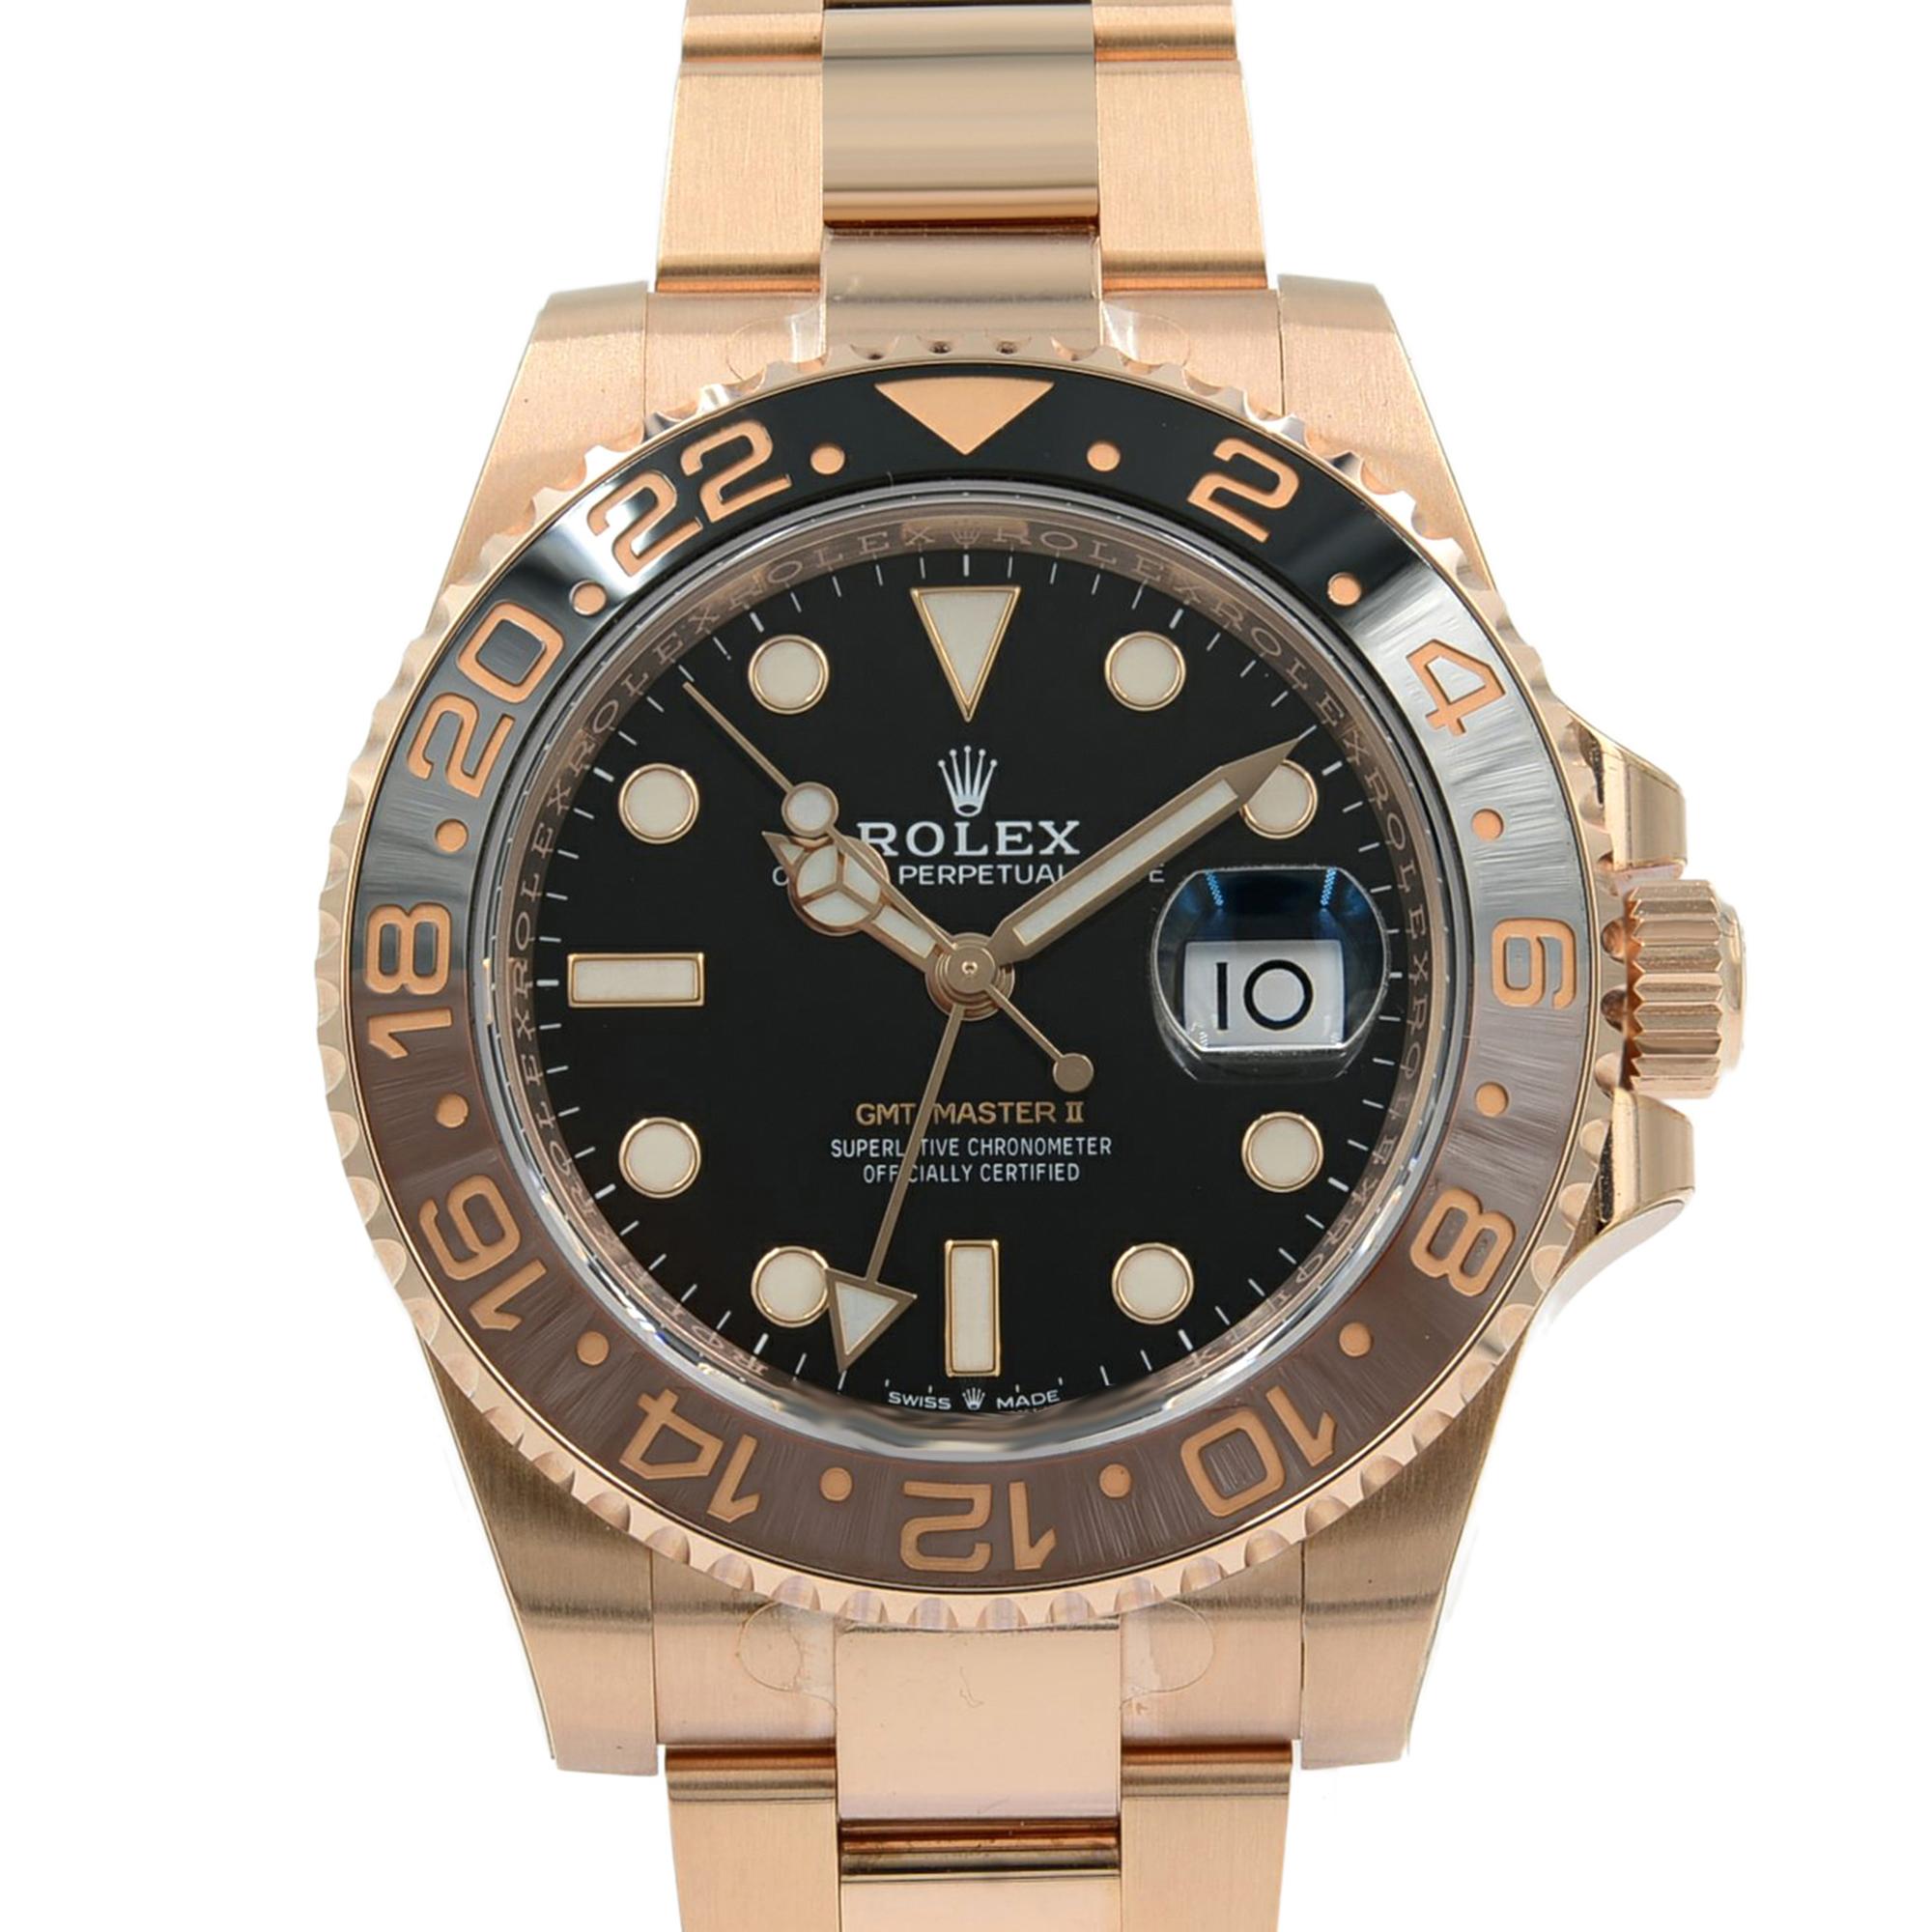 Unworn. 2023 card. Box and papers included. 

Brand: Rolex
Type: Wristwatch
Department: Men
Model: GMT-Master II 126715CHNR
Model Number: 126715CHNR
Country/Region of Manufacture: Switzerland
Style: Luxury
Vintage: No
Year Manufactured: